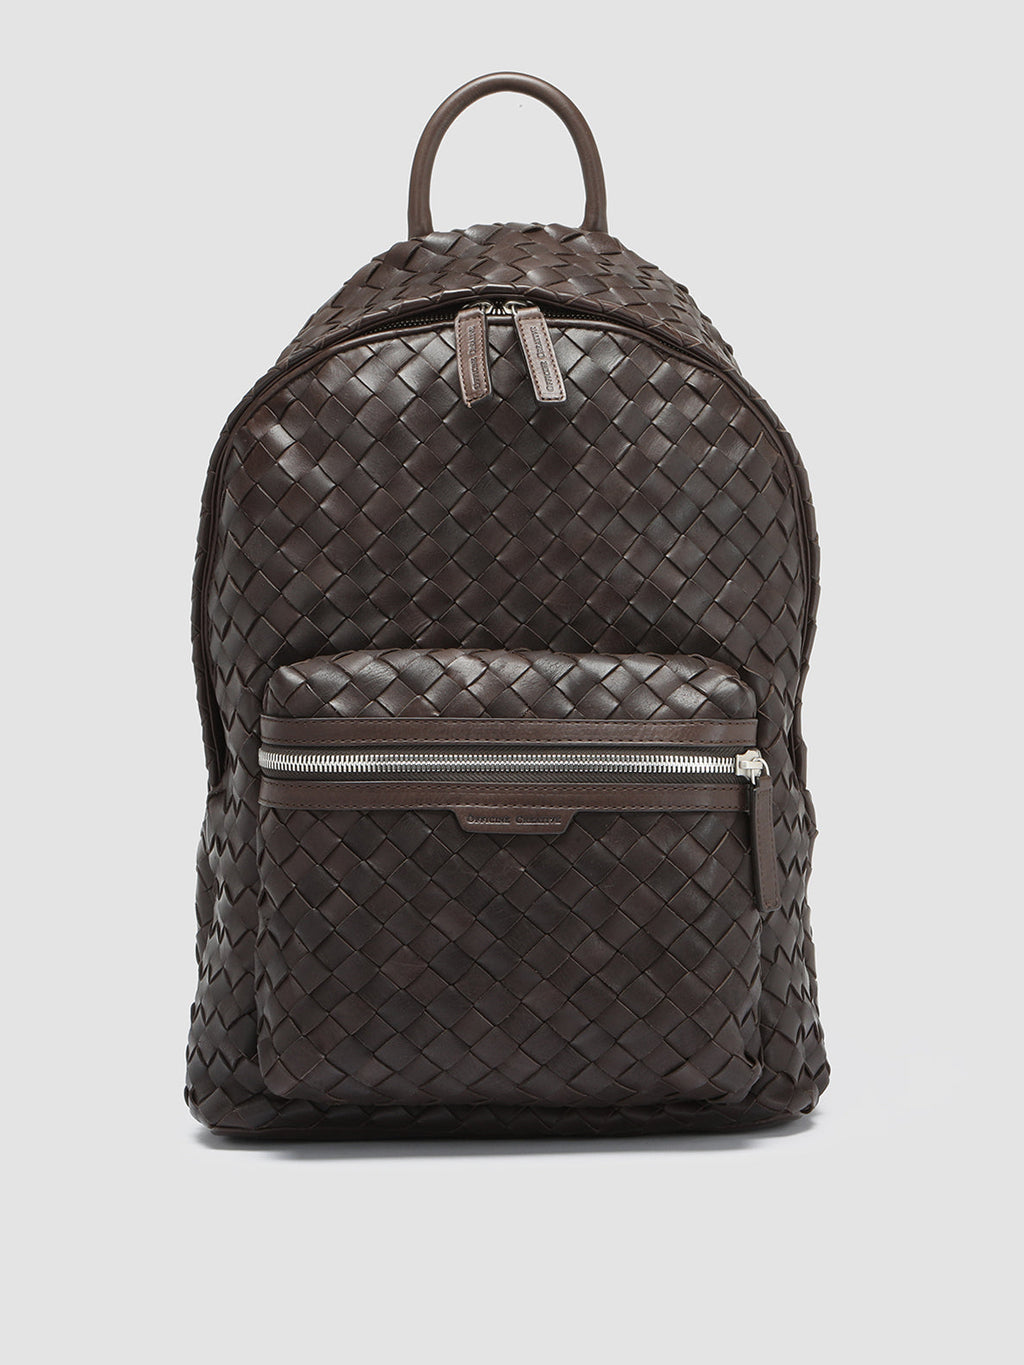 ARMOR 04 - Brown Leather backpack  Officine Creative - 1